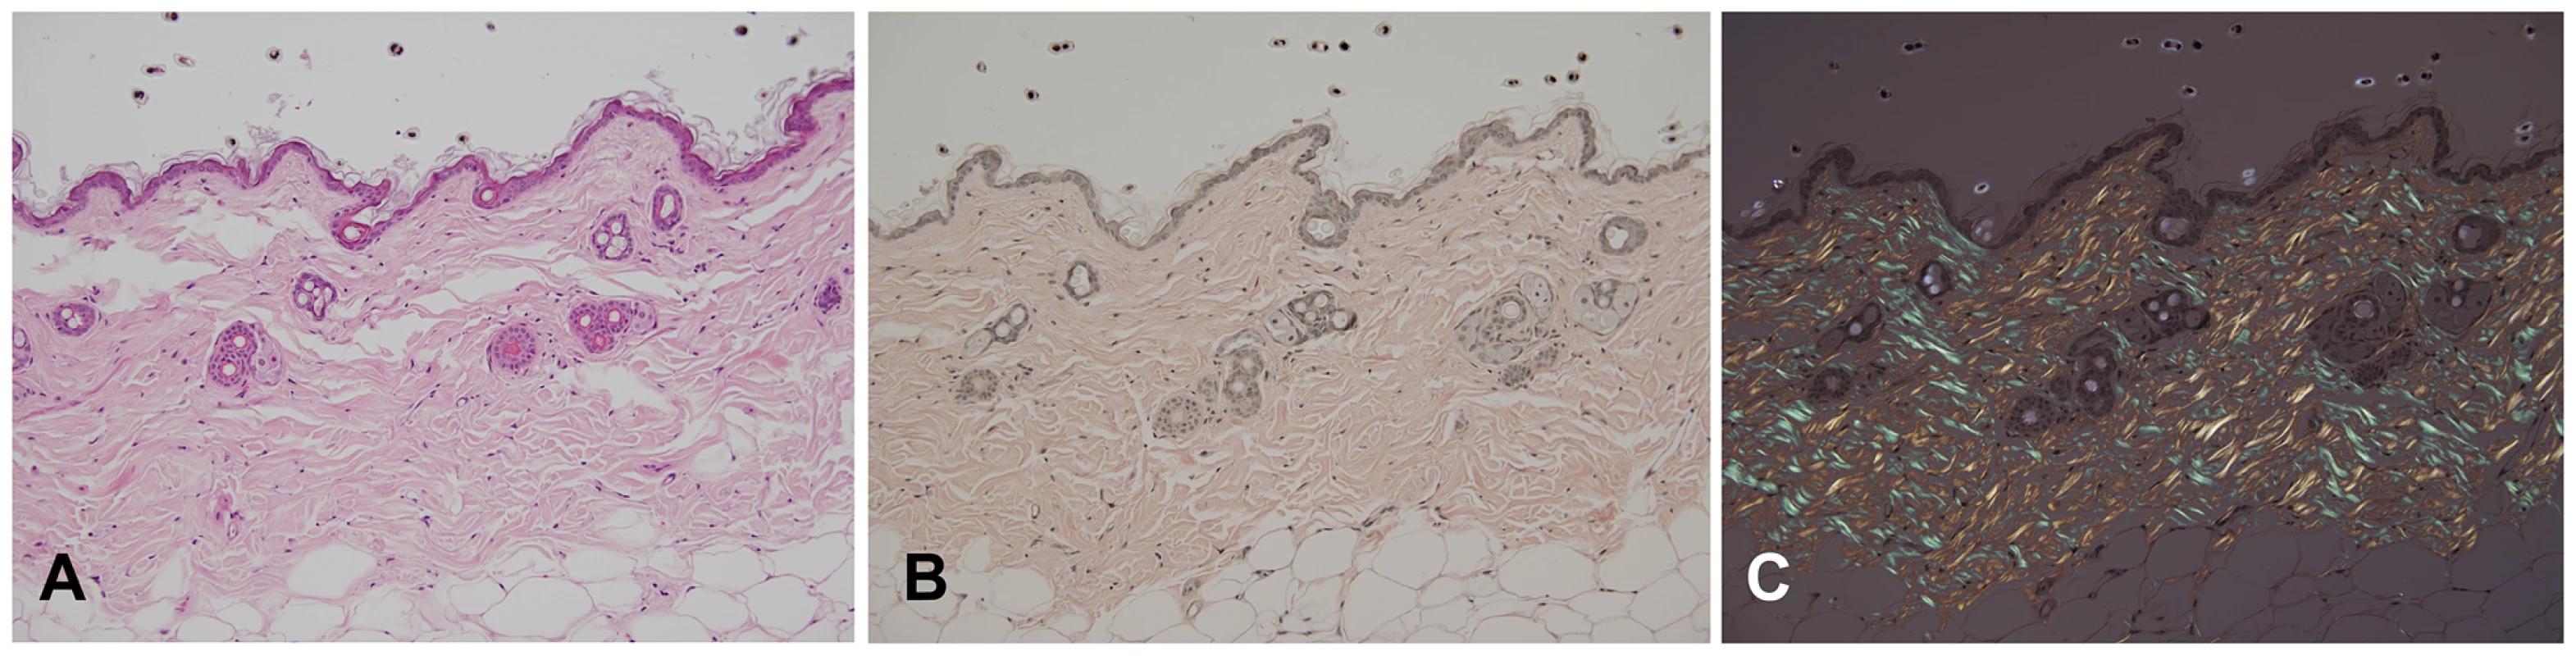 Histopathology analysis of amyloid in skin of an affected mouse.